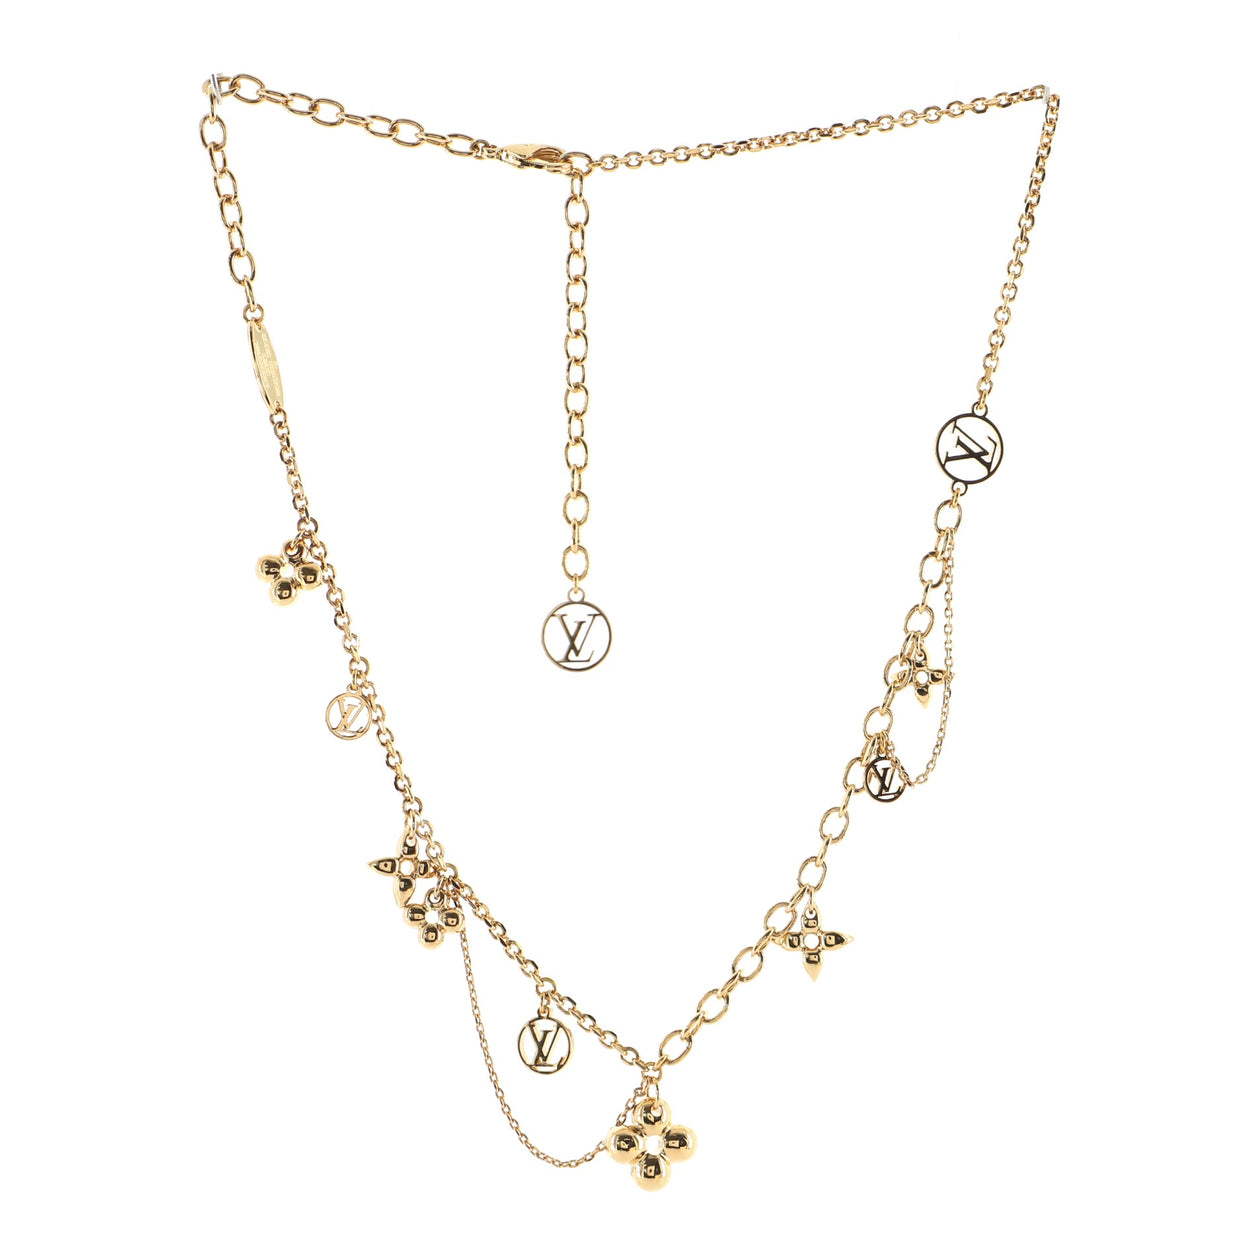 LOUIS VUITTON Blooming Supple Necklace 601020